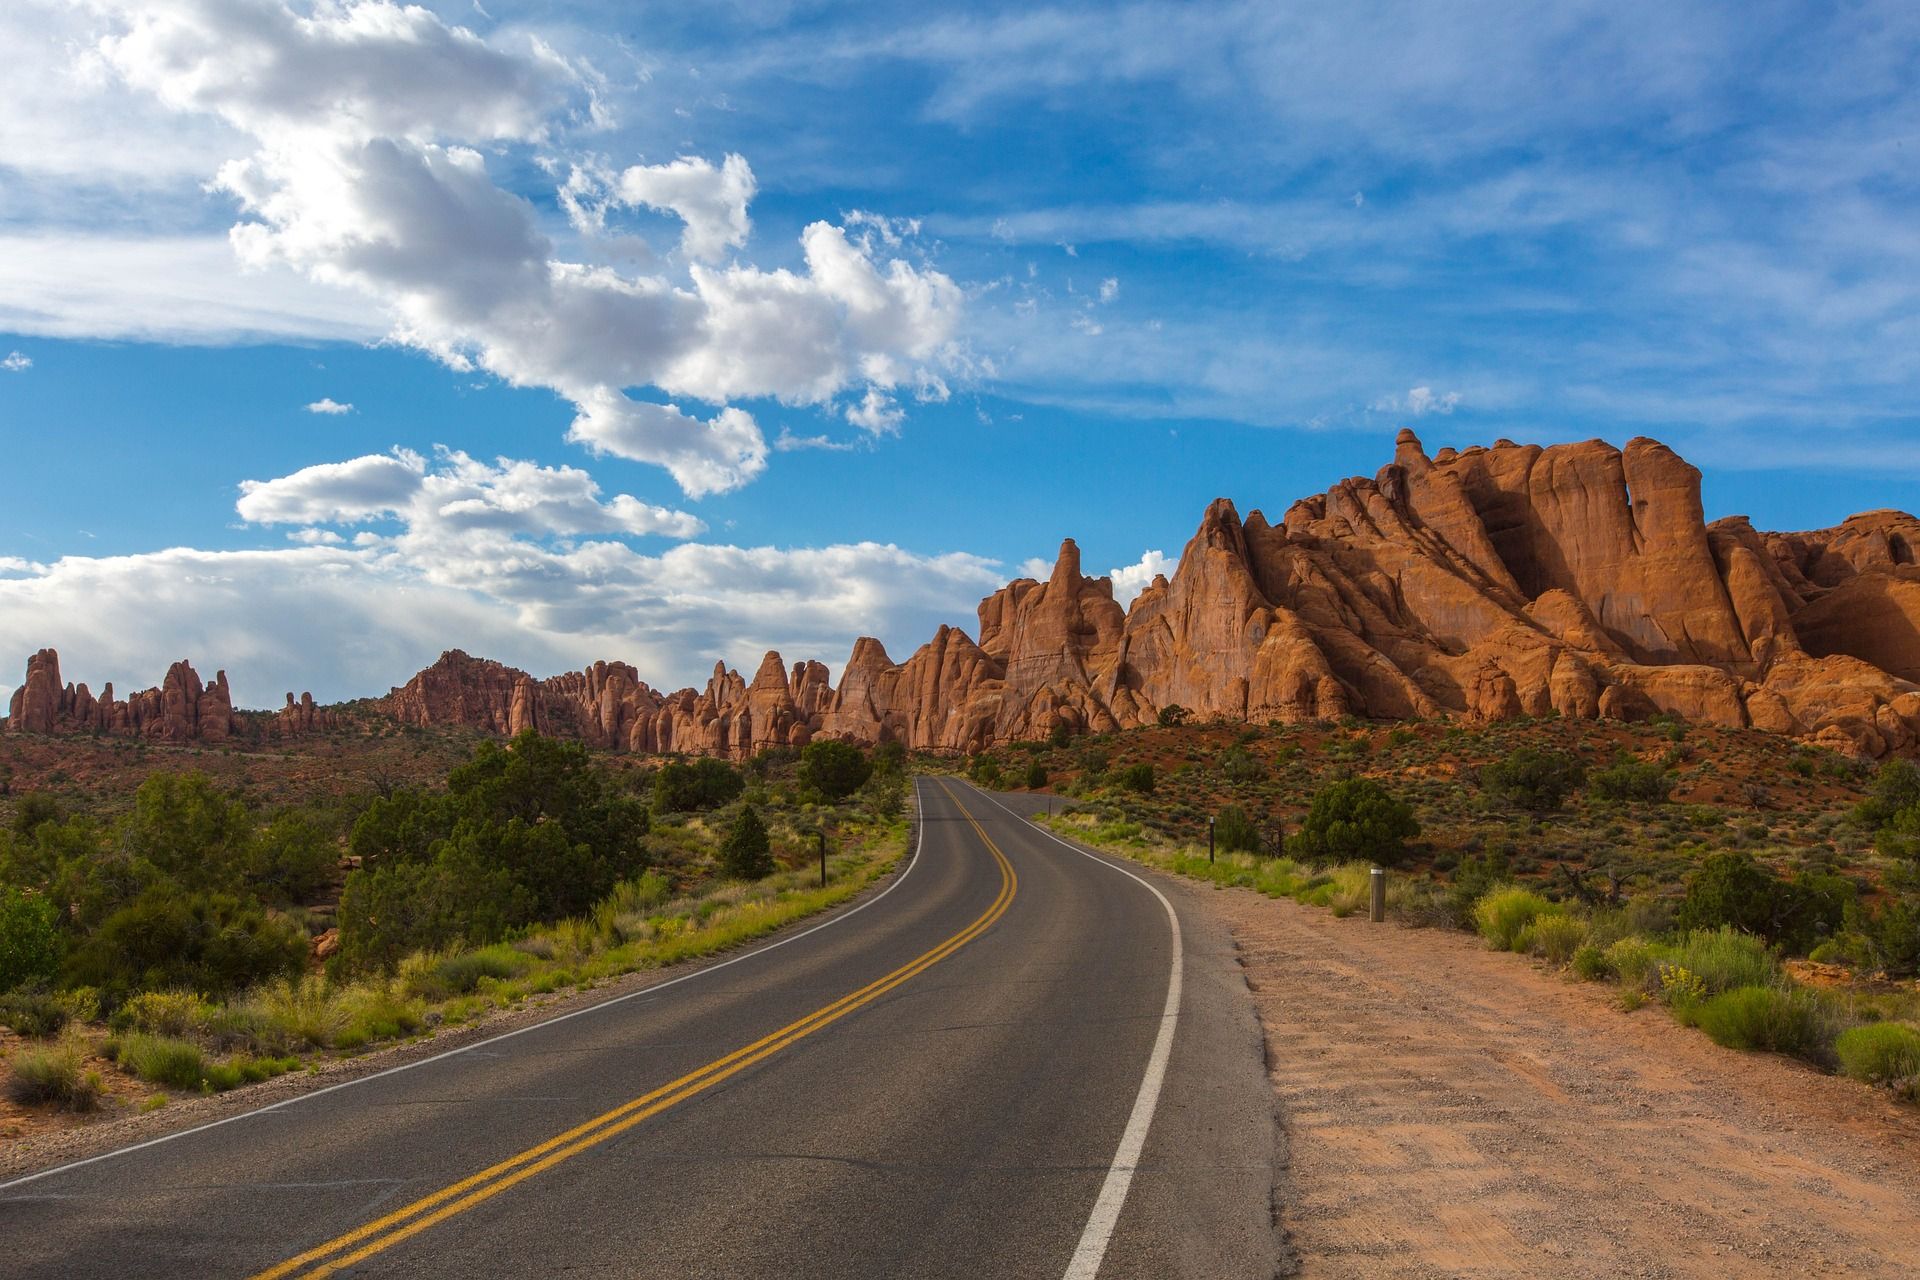 The scenic road to Red Rock Canyon in the Mojave Desert of Nevada, USA